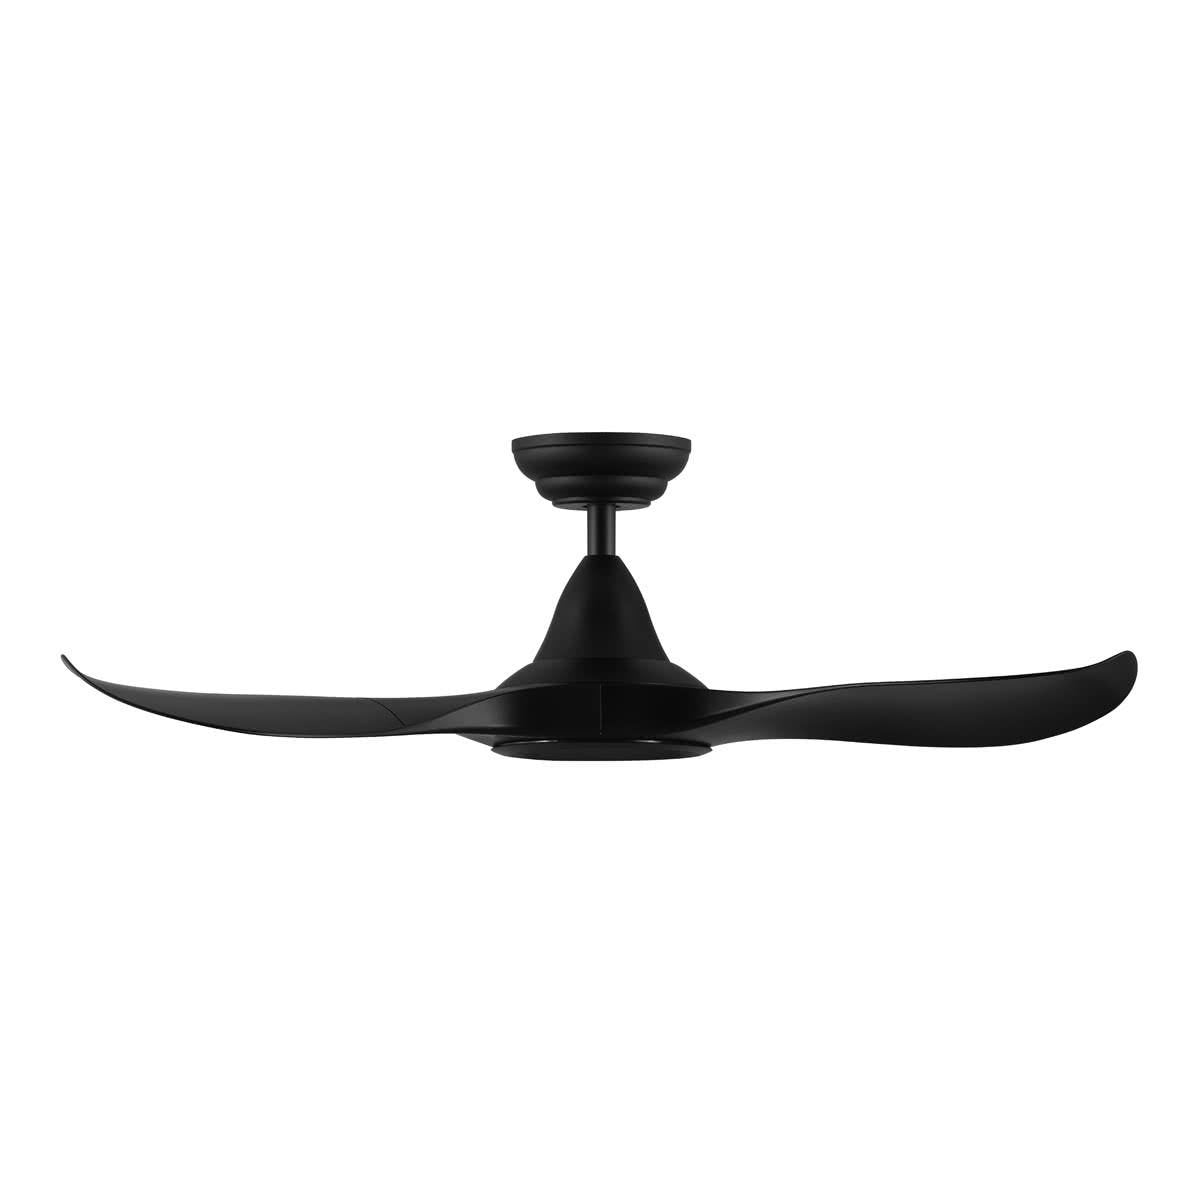 Eglo NOOSA 46” ABS 3 Blade DC Ceiling Fan with Remote Control & LED Light - Mases LightingEglo